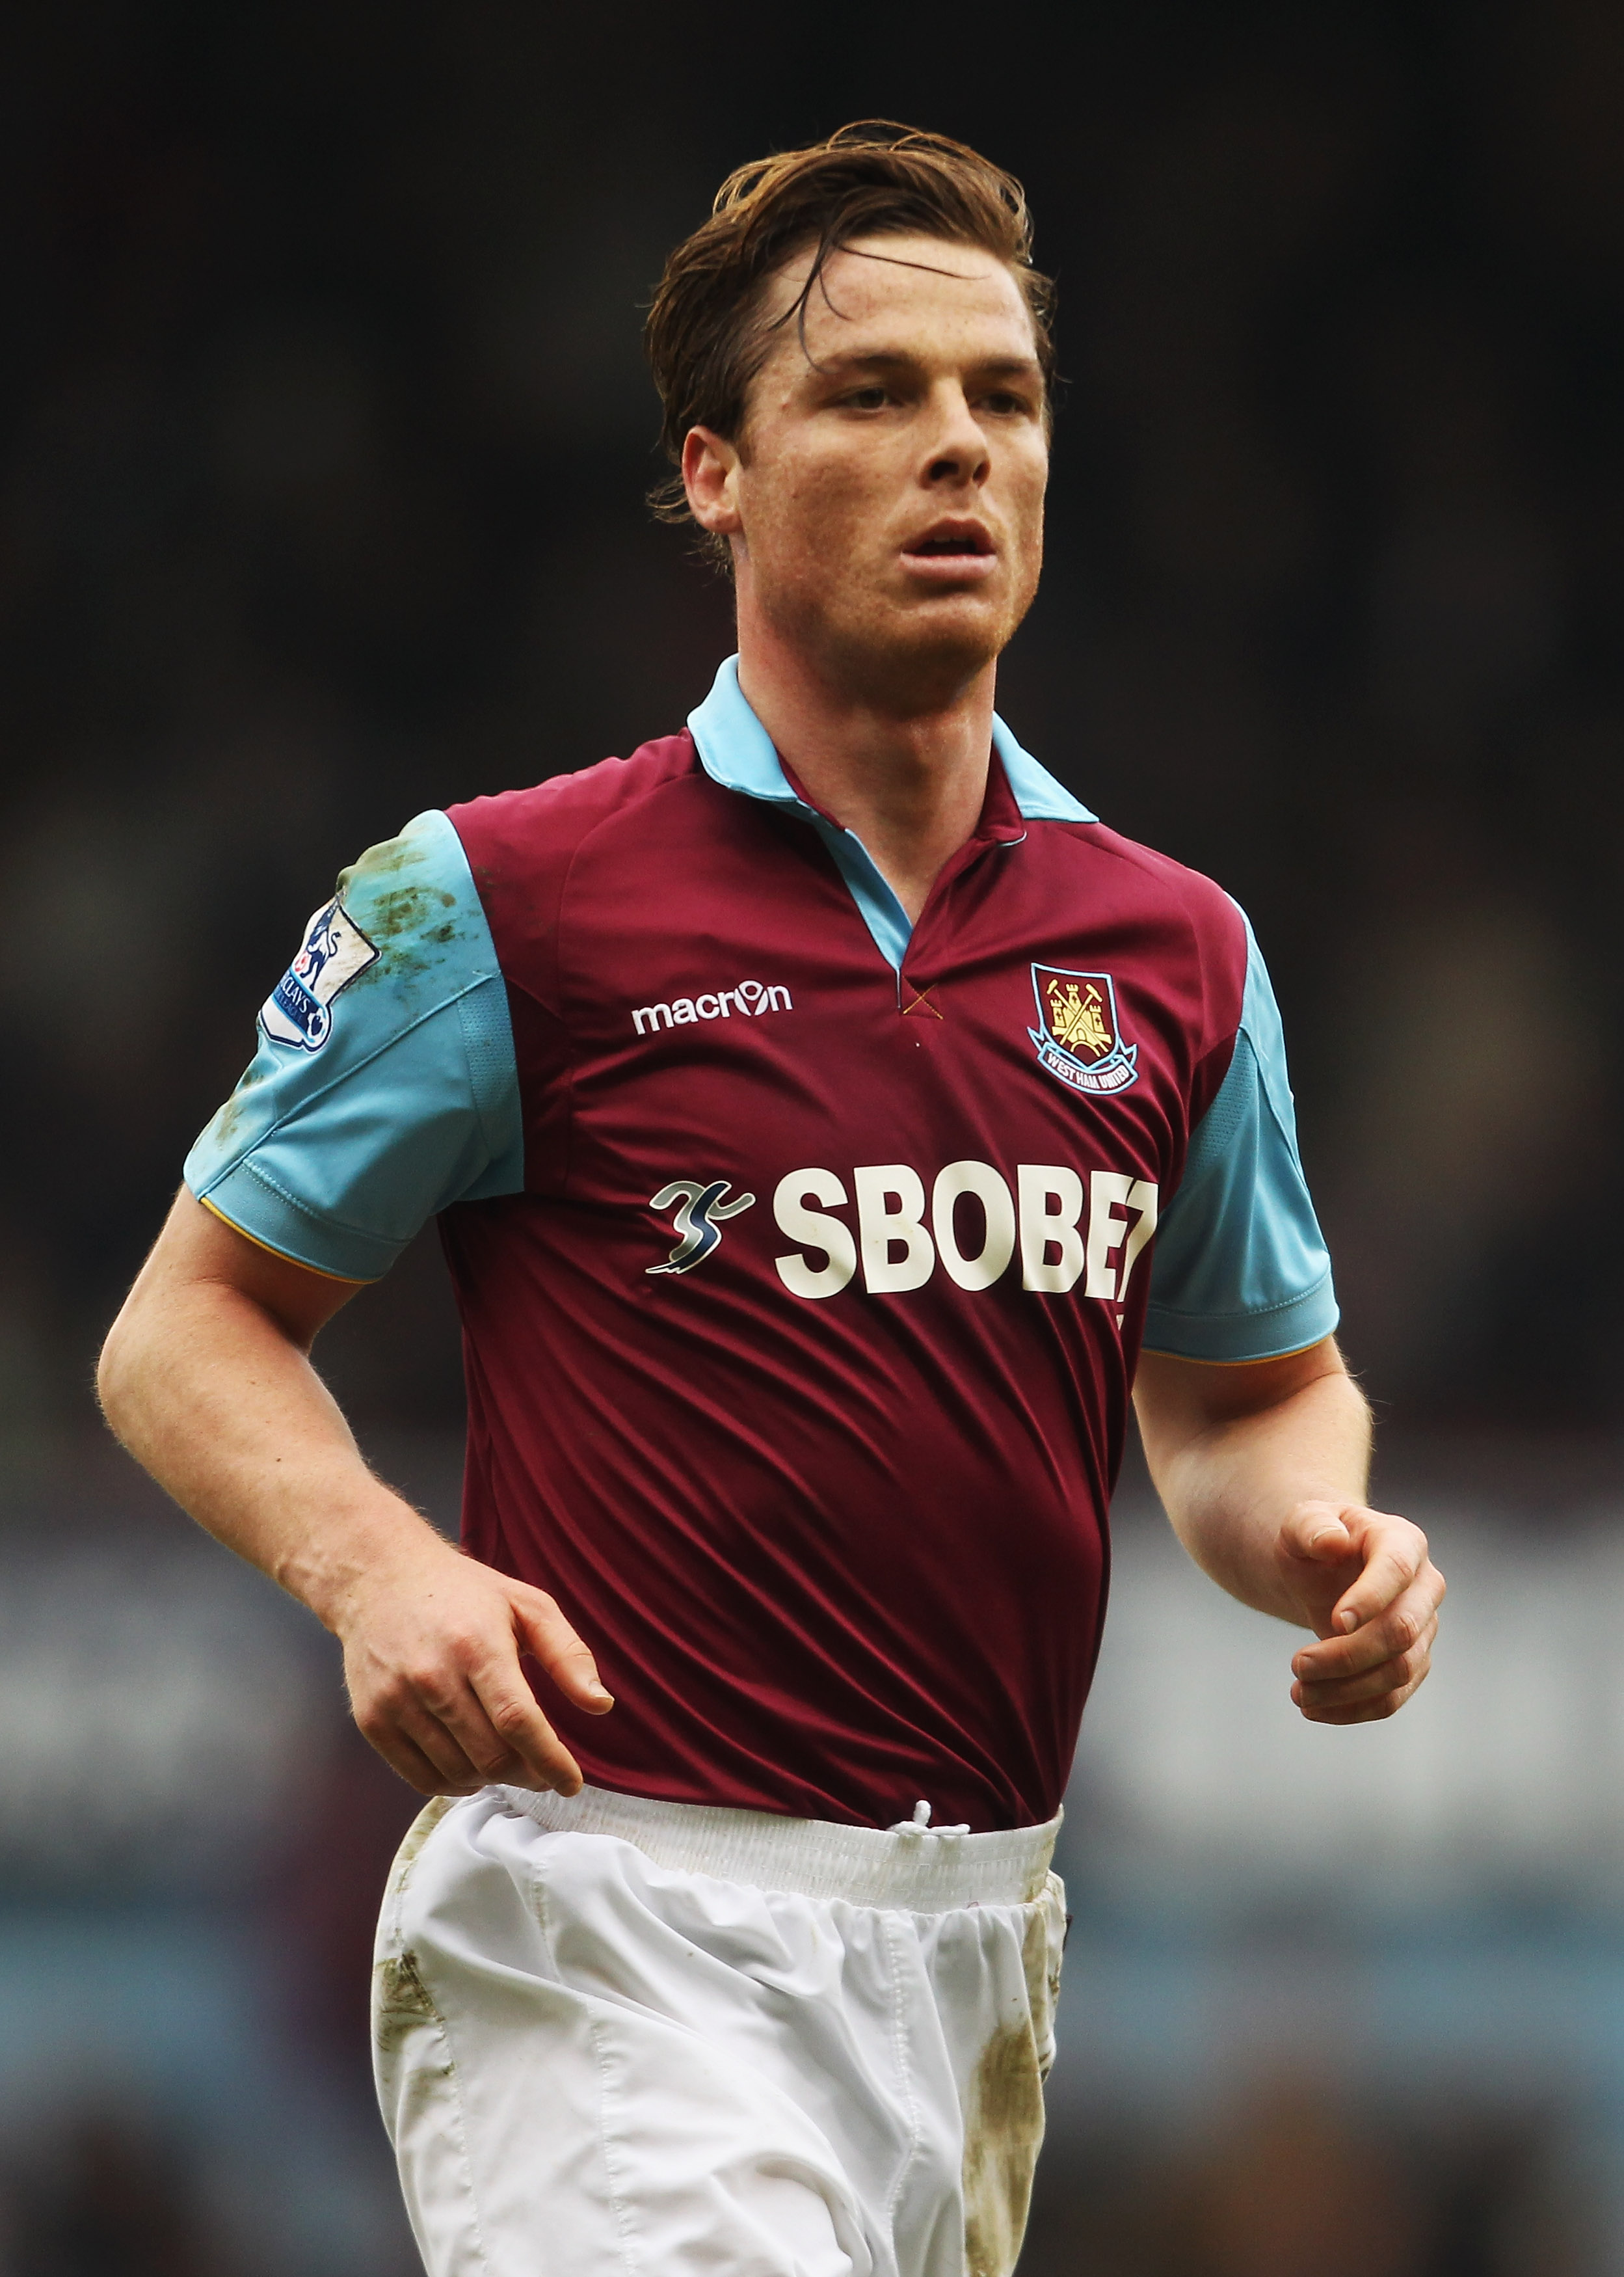 LONDON, UNITED KINGDOM - MARCH 05:  Scott Parker of West Ham United is seen during the Barclays Premier League match between West Ham United and Stoke City at the Boleyn Ground on March 5, 2011 in London, England.  (Photo by Scott Heavey/Getty Images)